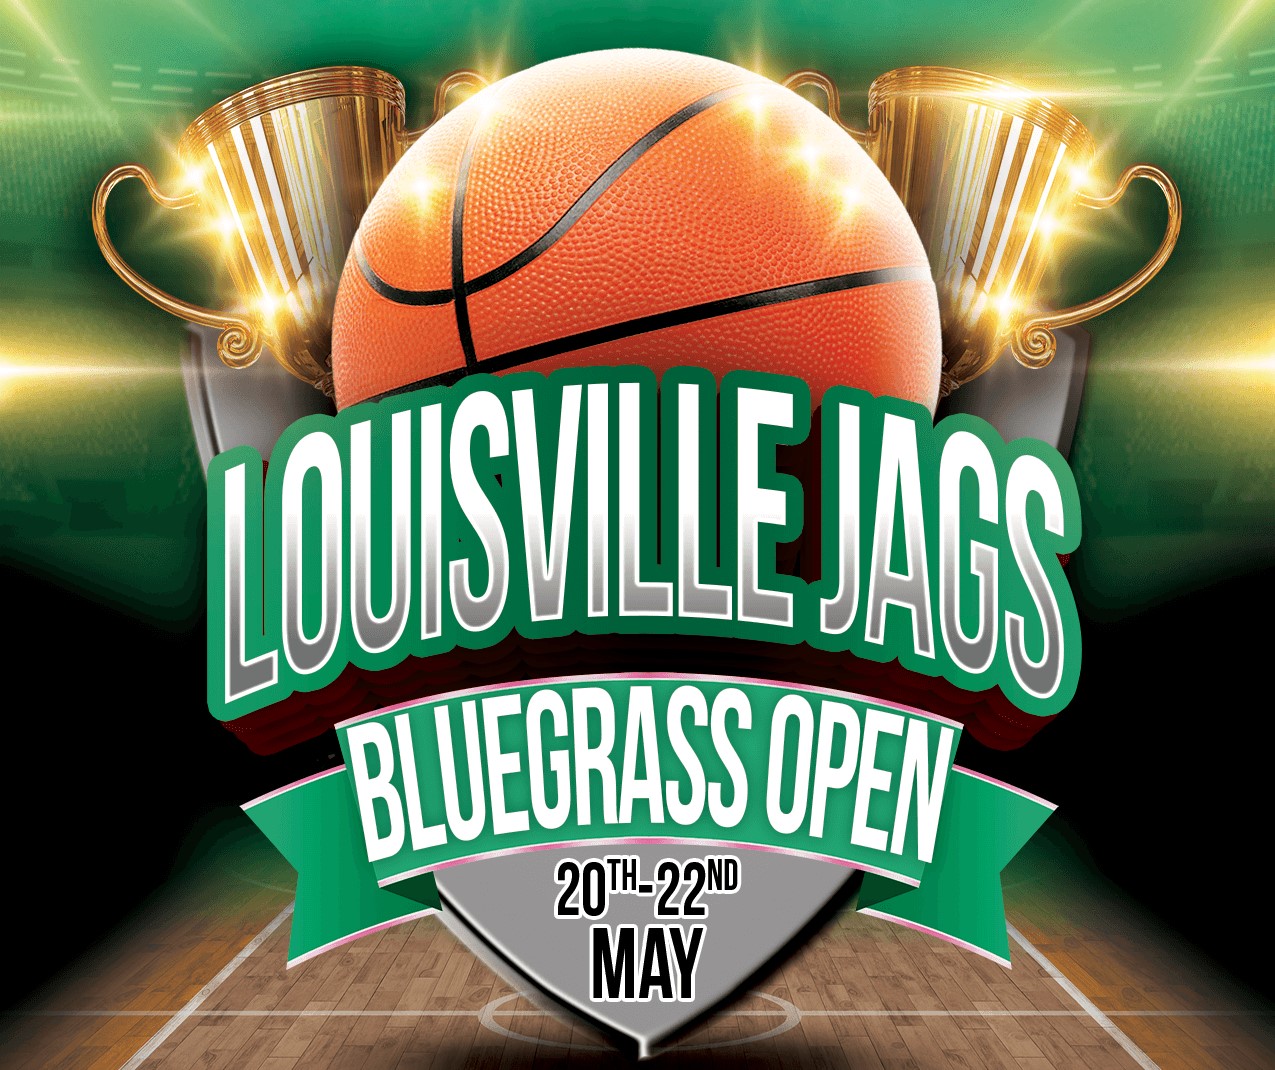 <span style="font-size: 14pt;"><strong><span style="color: #ff6600;">Louisville Jags Bluegrass Open<br />May 20-22, 2022 <br /><a href="http://www.midwestbballtournaments.com/ViewEvent.aspx?EID=951">Click Here for more Info </a></span></strong></span>